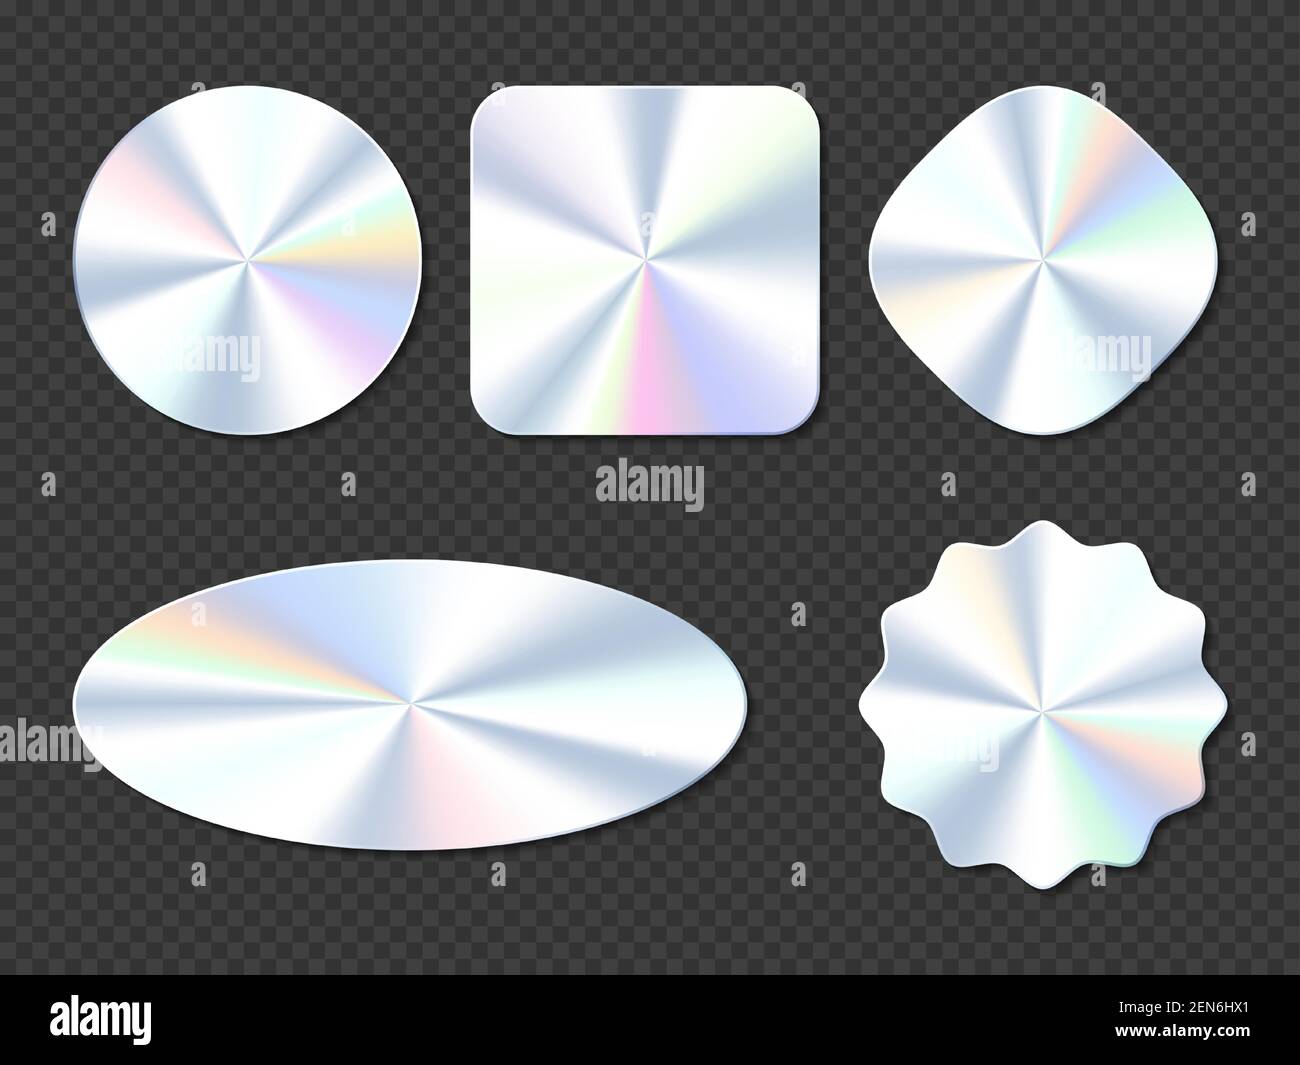 Holographic stickers, hologram labels of different shapes. Round, square, oval, rhombus and wavy iridescent foil or silver colored blank rainbow shiny emblems, Realistic 3d vector illustration, set Stock Vector